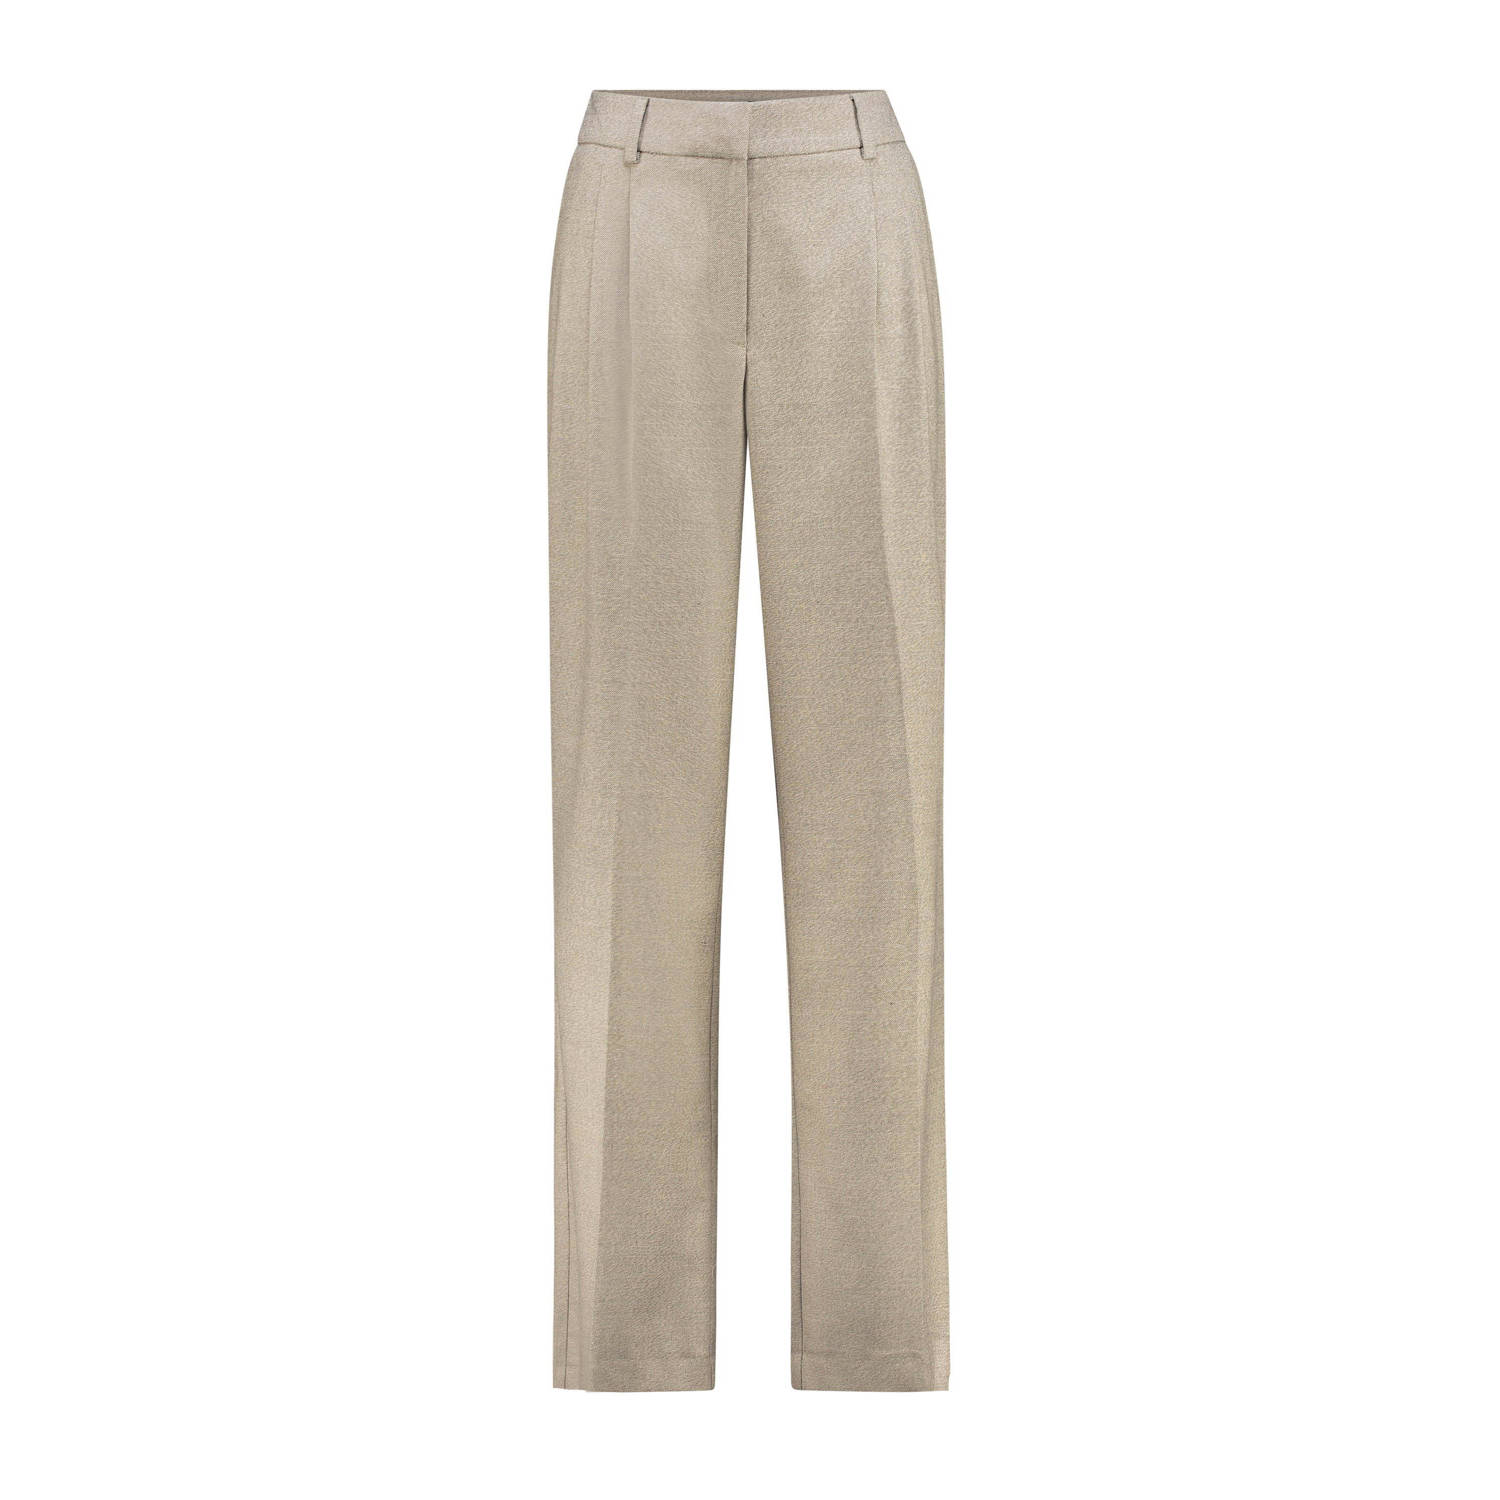 Expresso straight fit pantalon taupe